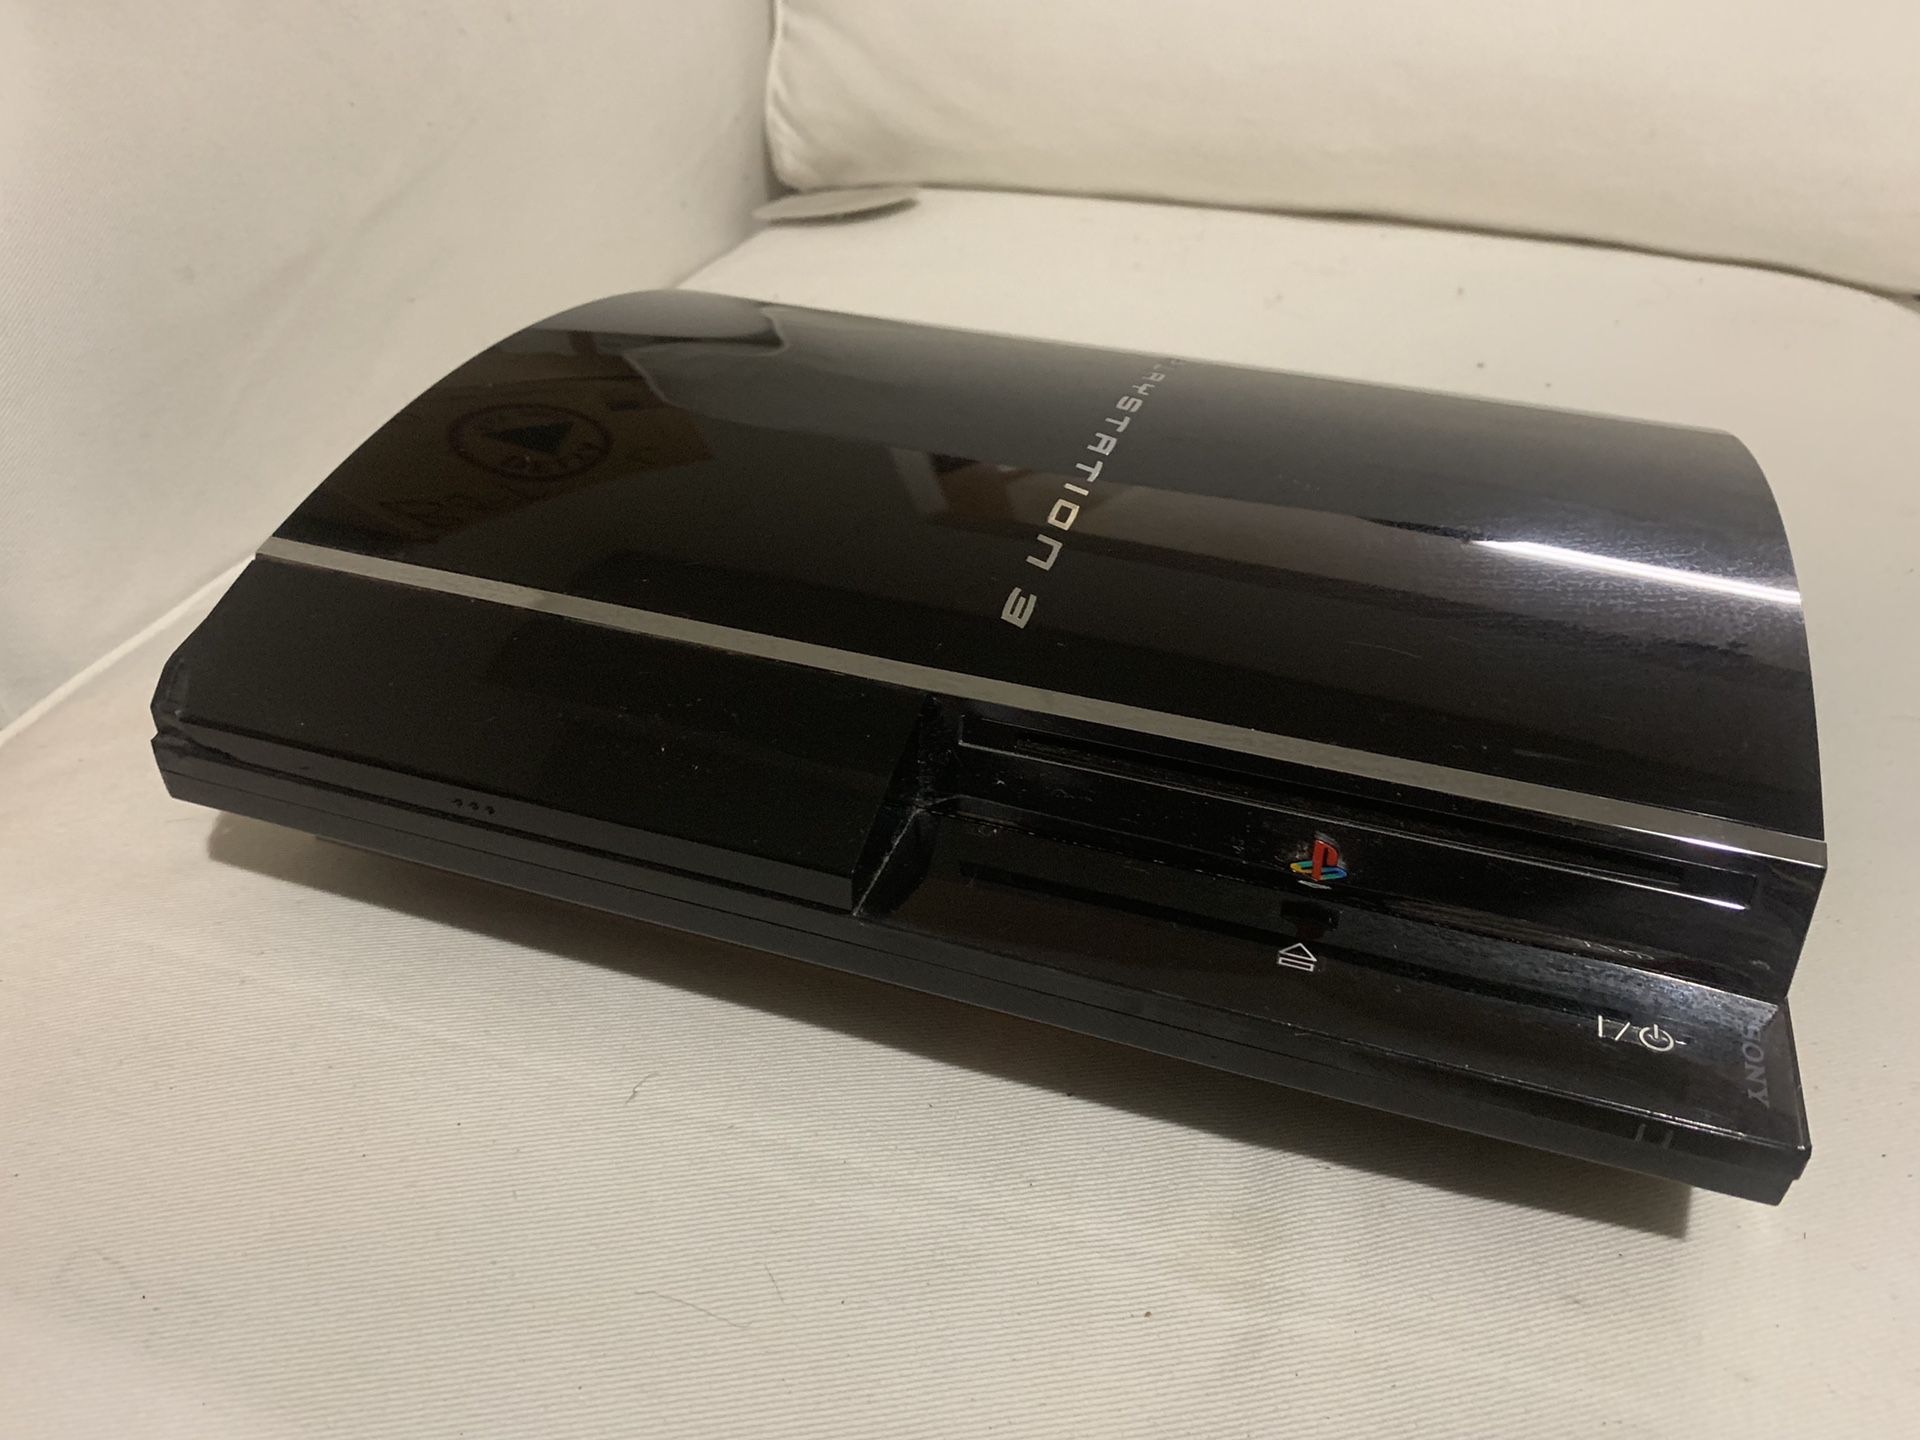 PlayStation 3 - Vintage and barely used